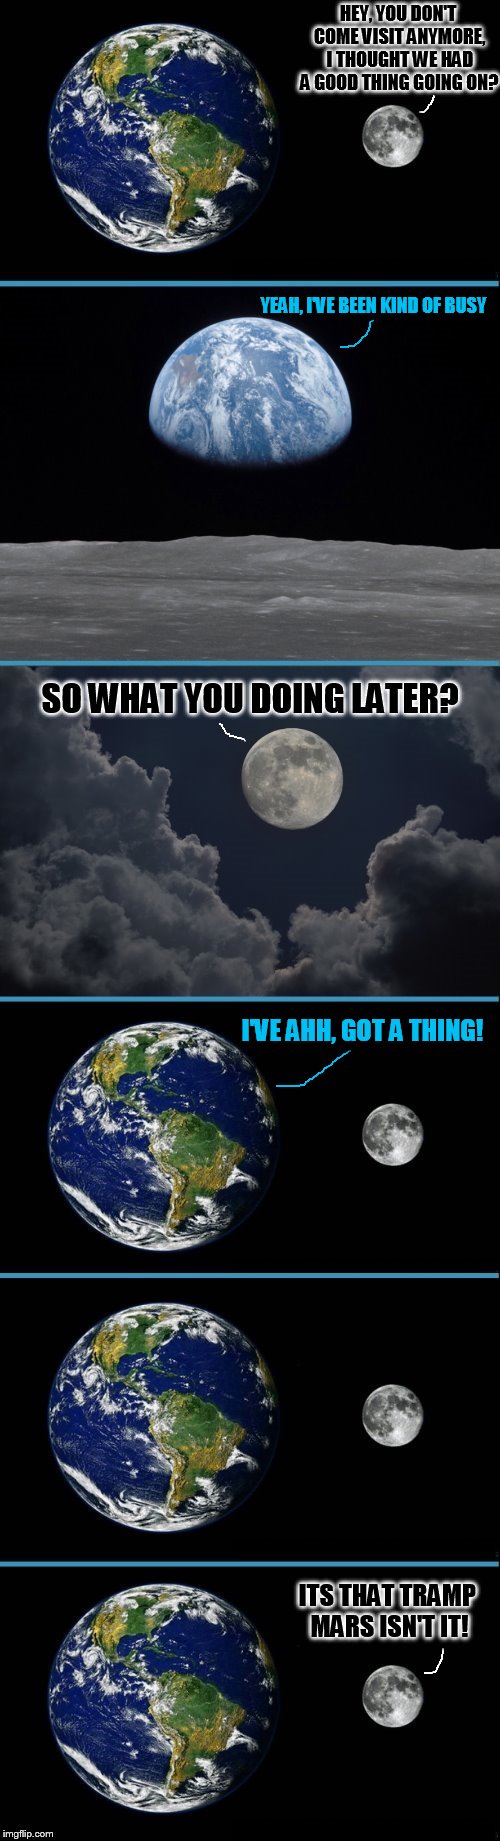 Overly Attached Moon | HEY, YOU DON'T COME VISIT ANYMORE, I THOUGHT WE HAD A GOOD THING GOING ON? YEAH, I'VE BEEN KIND OF BUSY; SO WHAT YOU DOING LATER? I'VE AHH, GOT A THING! ITS THAT TRAMP MARS ISN'T IT! | image tagged in memes,moon,earth,mars,overly attached girlfriend,mars exploration | made w/ Imgflip meme maker